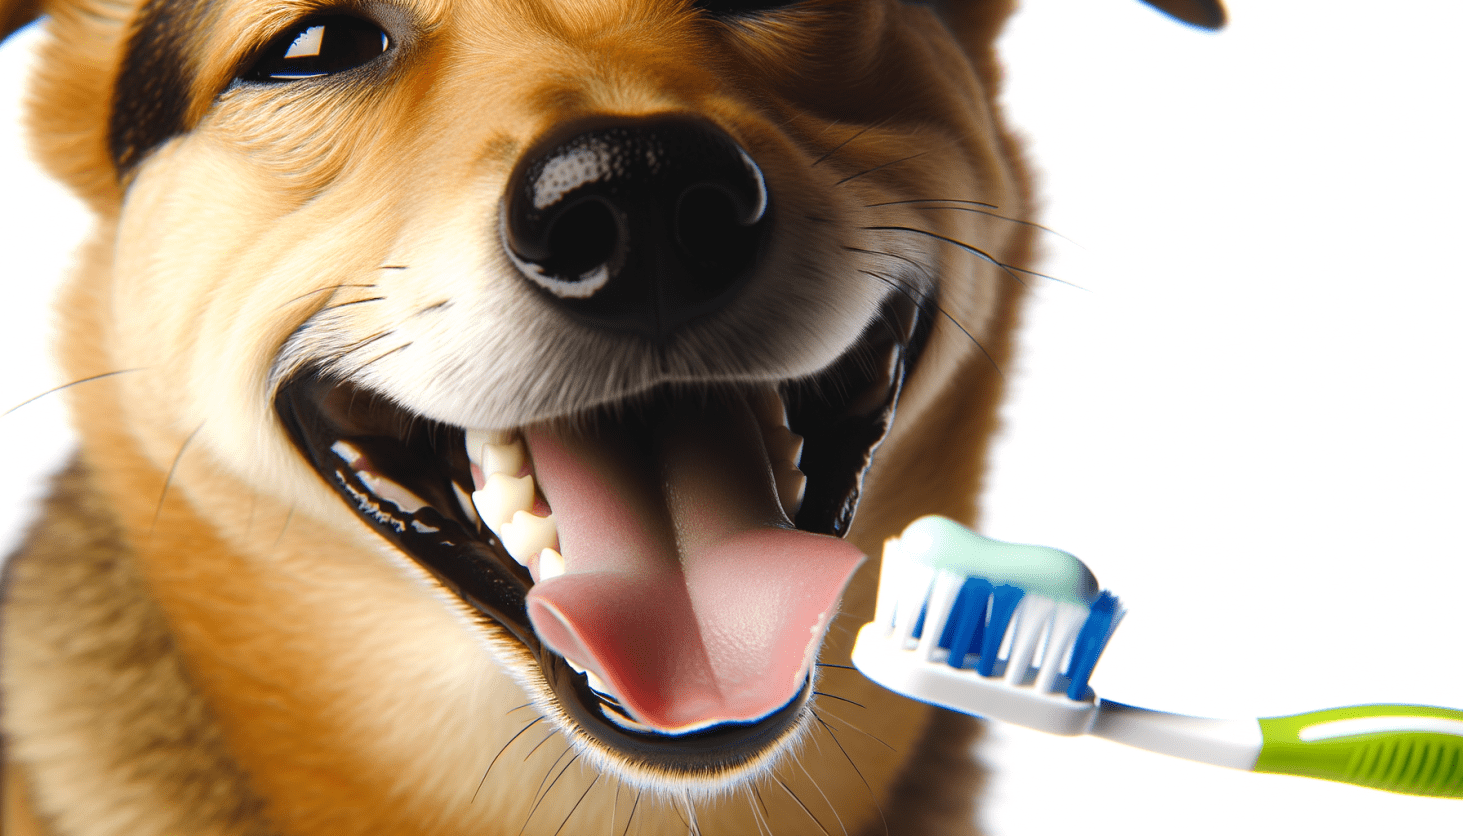 A close-up of a content pet during a tooth-brushing session.